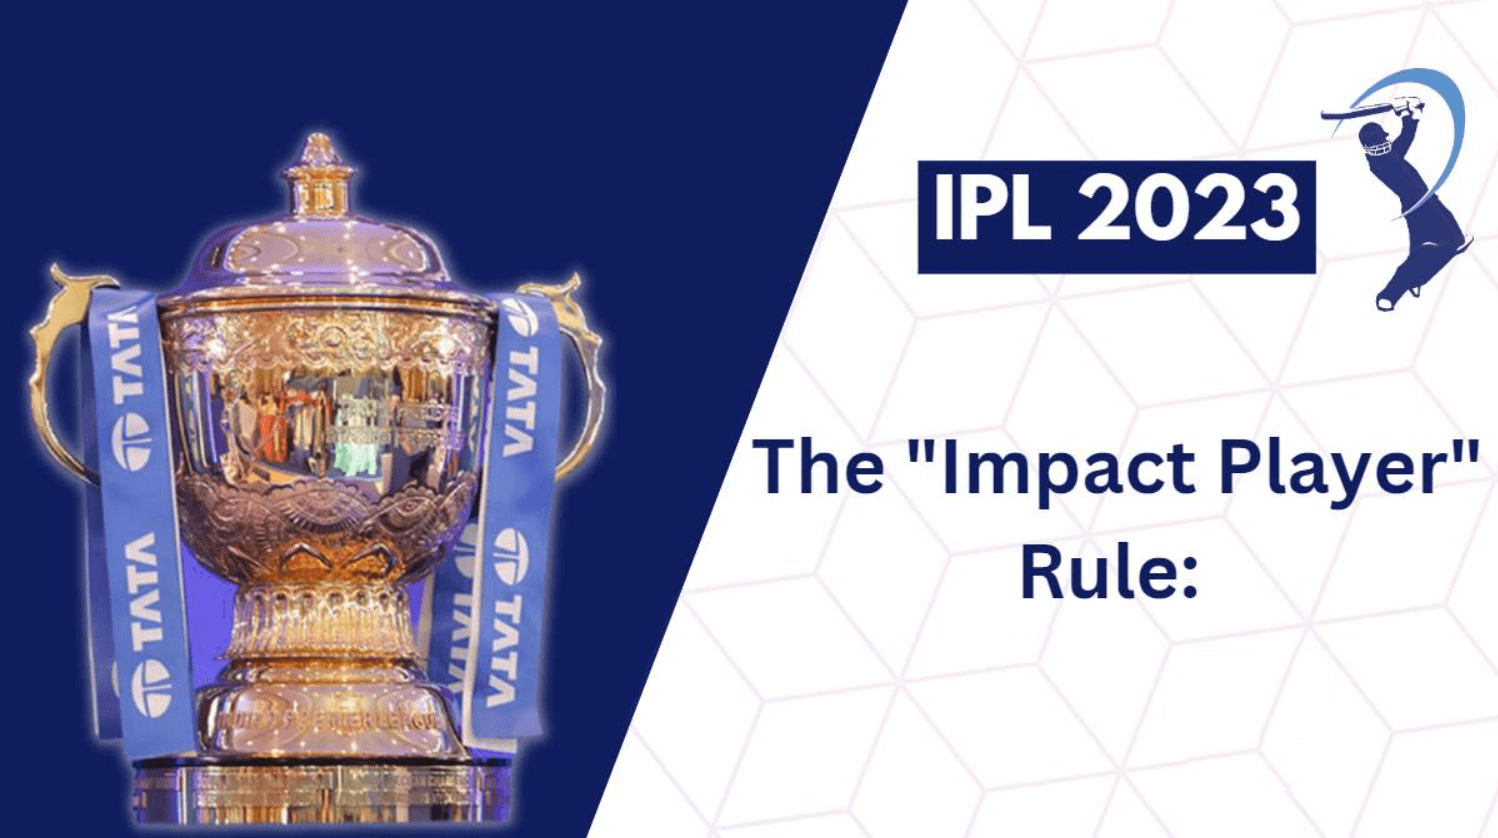 What is the impact player rule in IPL?